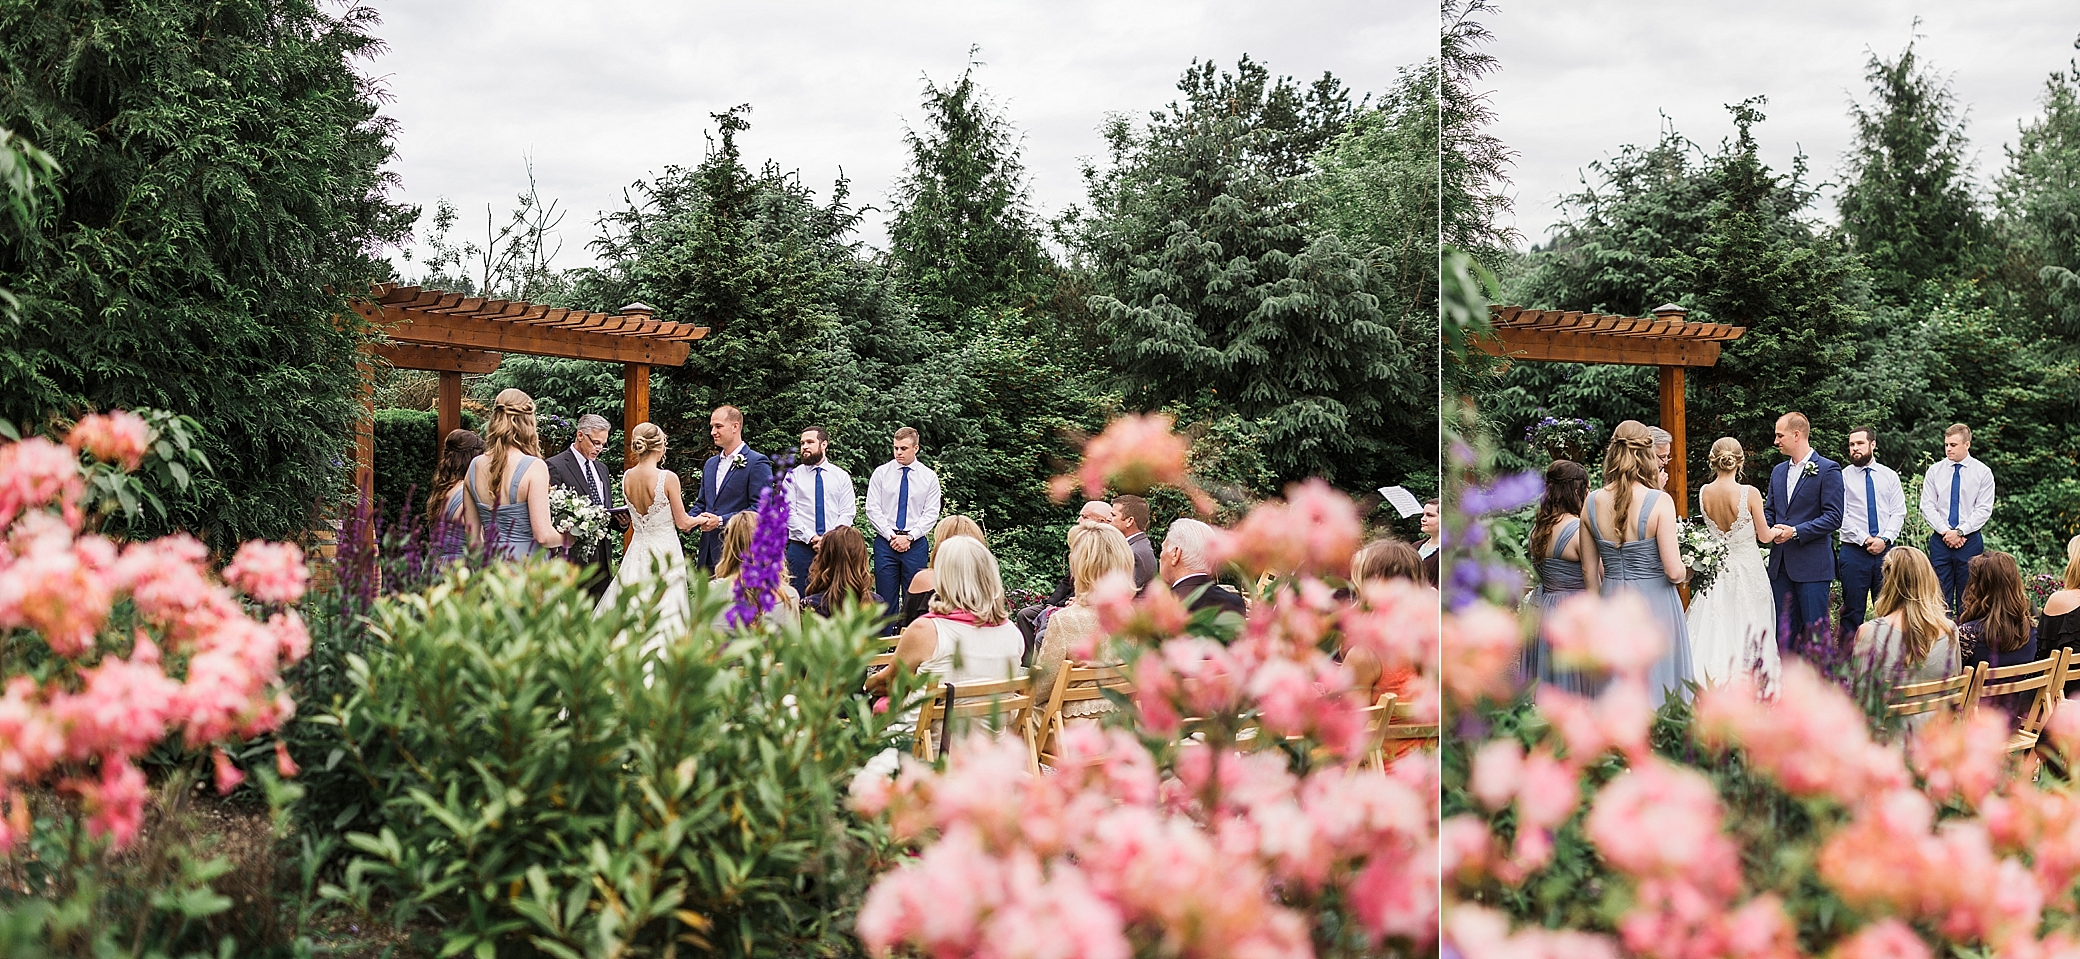 Intimate Wedding Ceremony at Willows Lodge in Woodinville, WA with Megan Montalvo Photography 